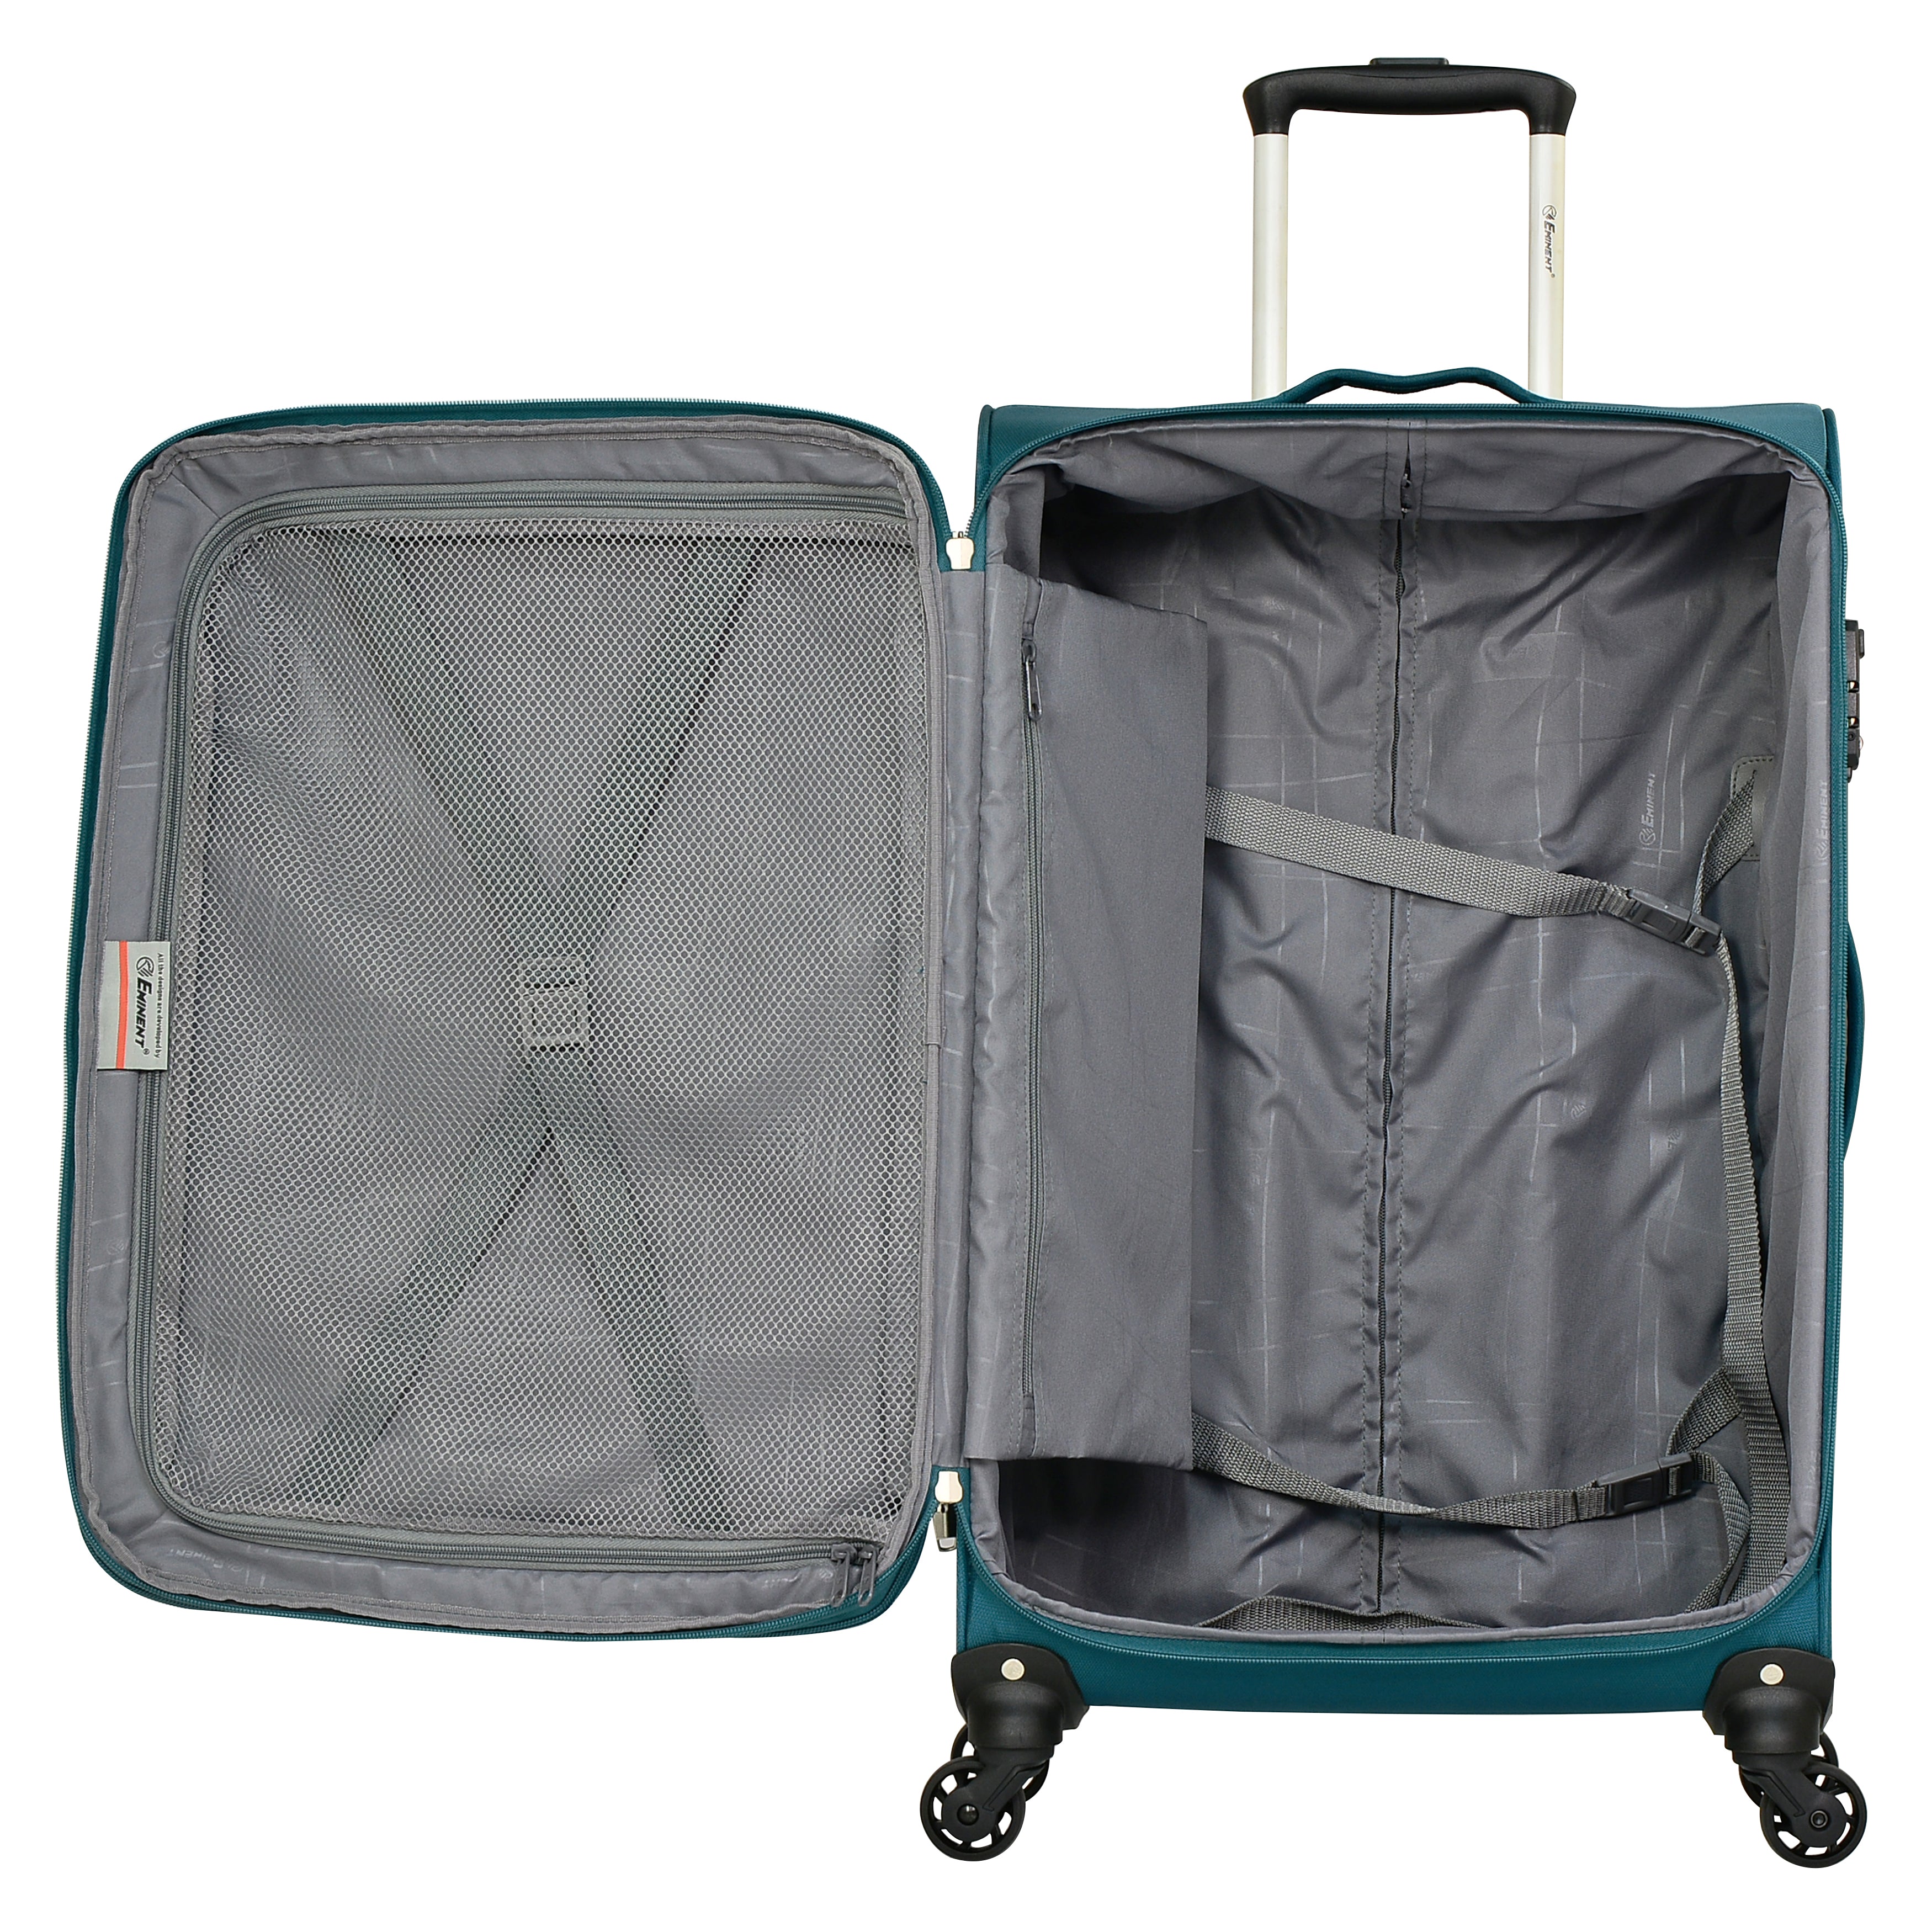 Eminent Lightweight 24” inch checked baggage trolley (S0190-24)